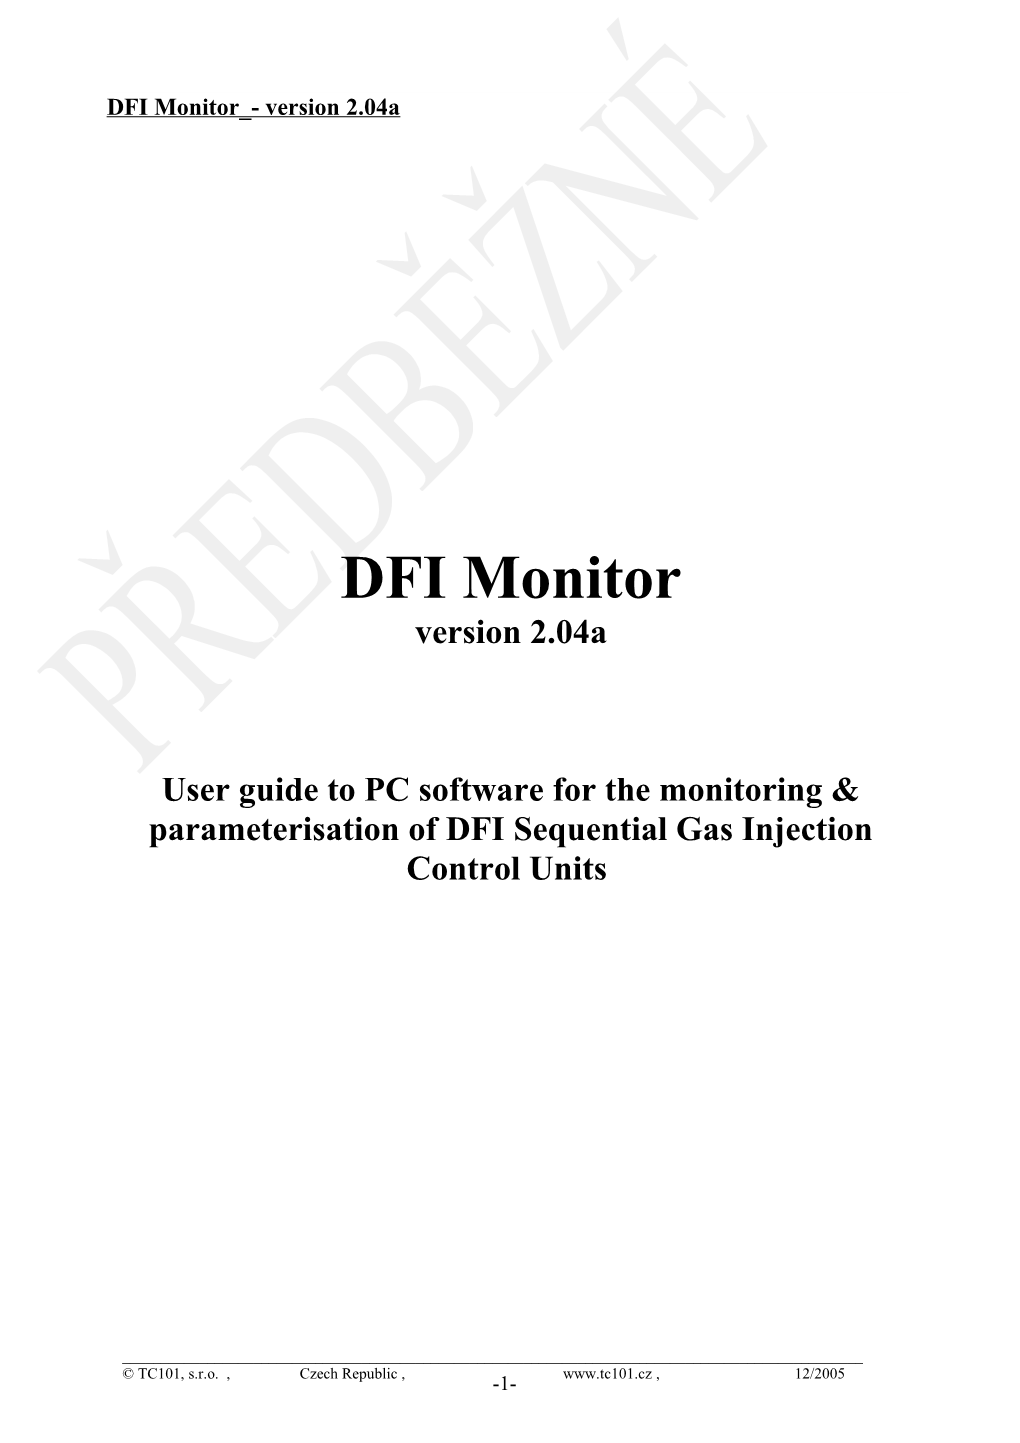 User Guide to PC Software for the Monitoring & Parameterisation of DFI Sequential Gas